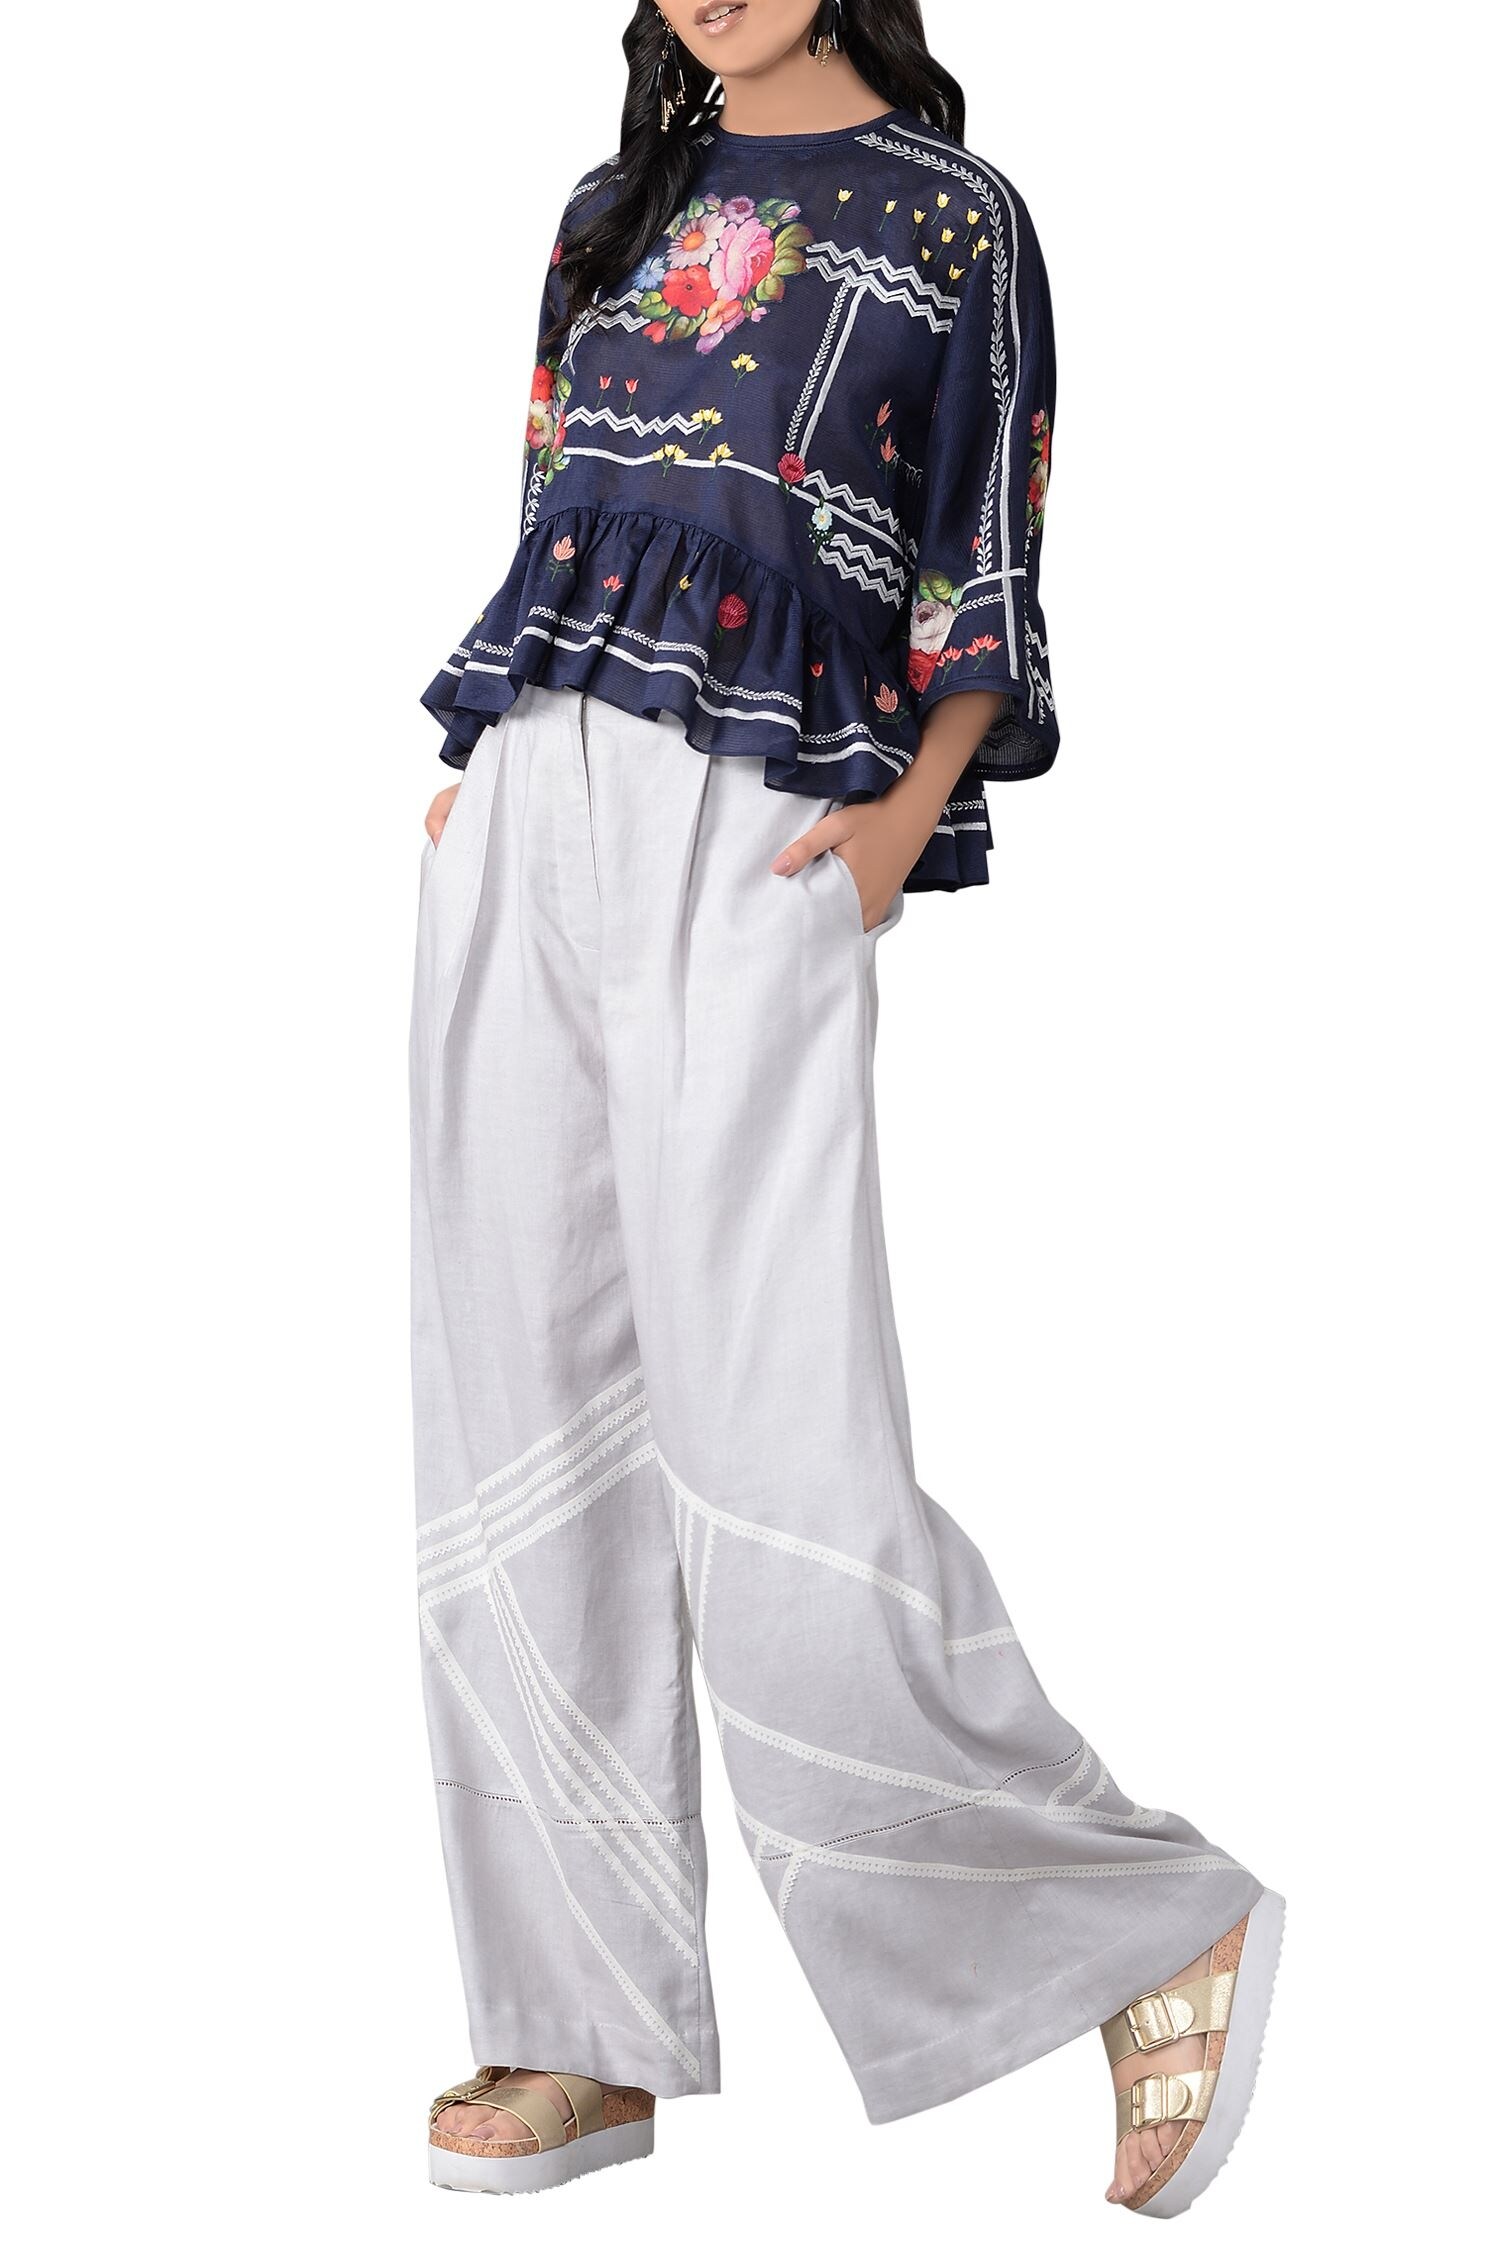 Sahil Kochhar Blue Floral Three-dimensional Embroidered Top And Pants